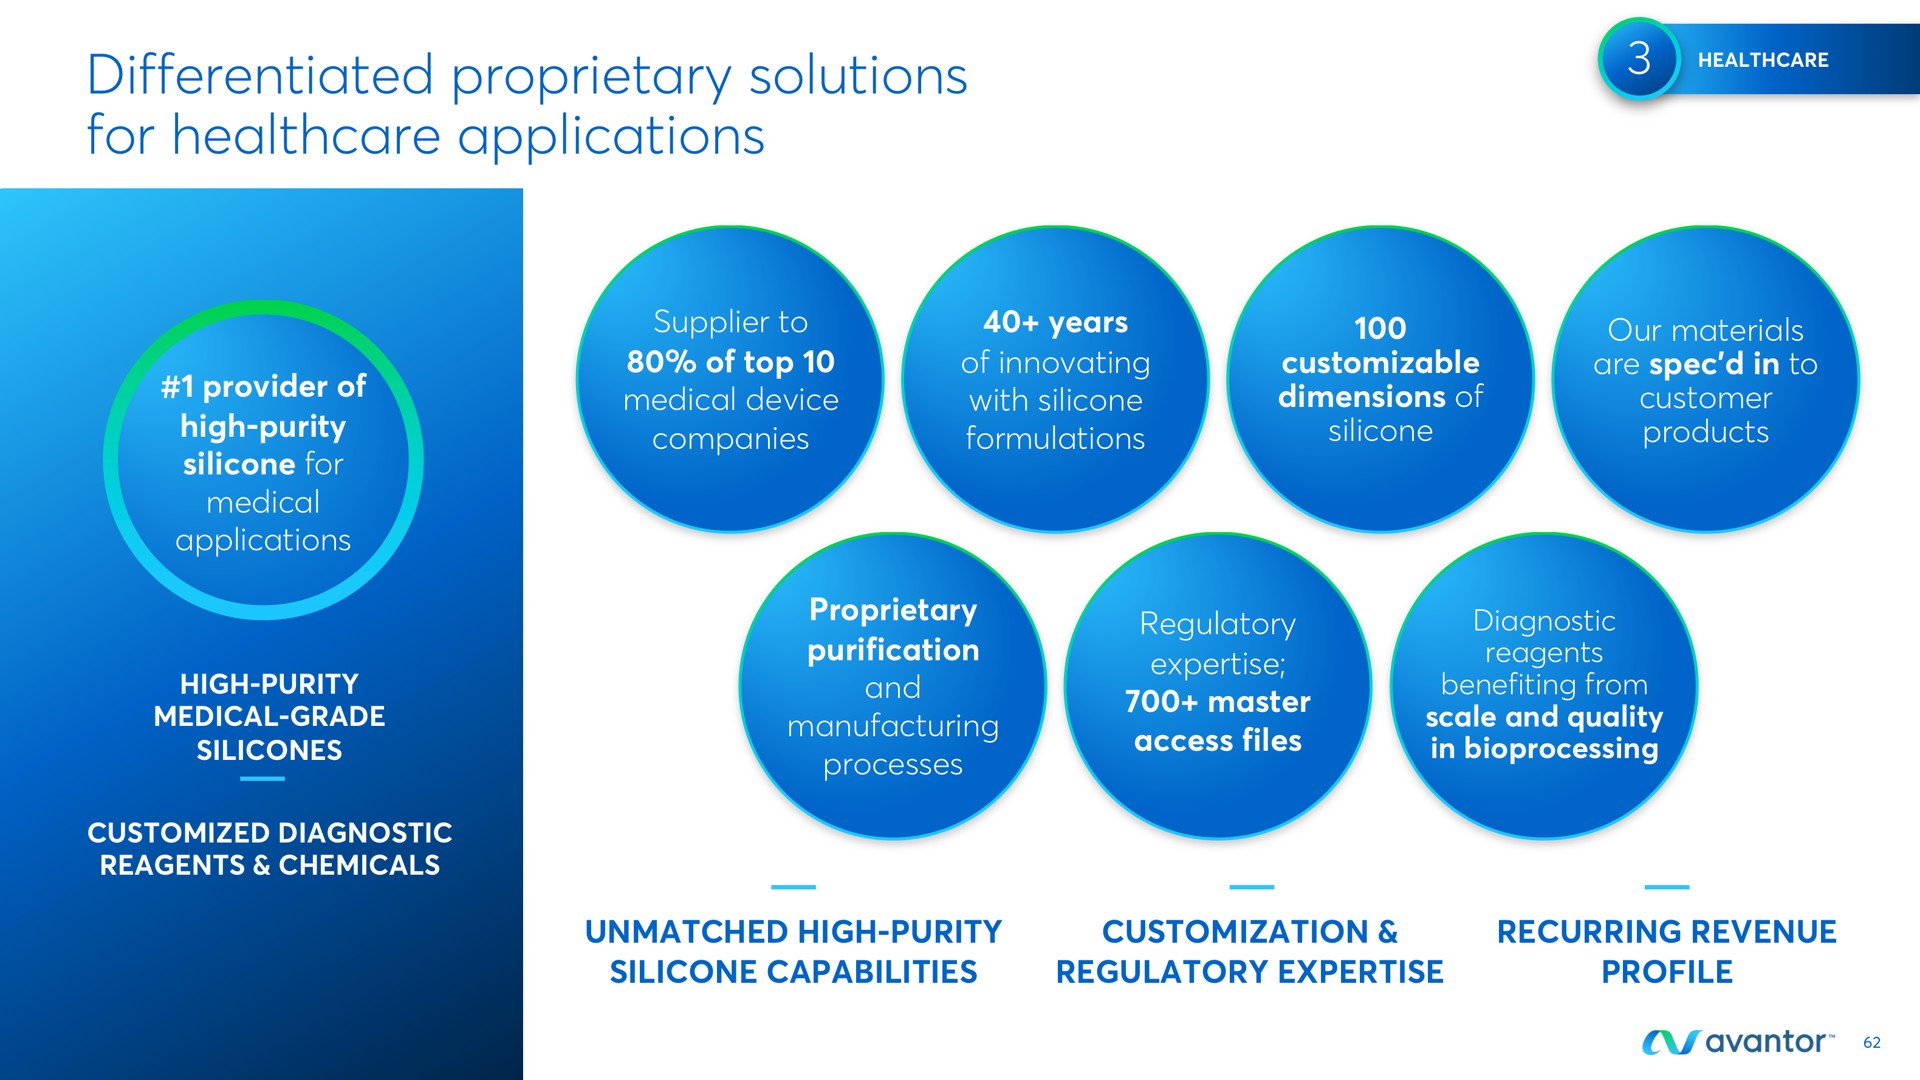 differentiated proprietary solutions for applications | Avantor